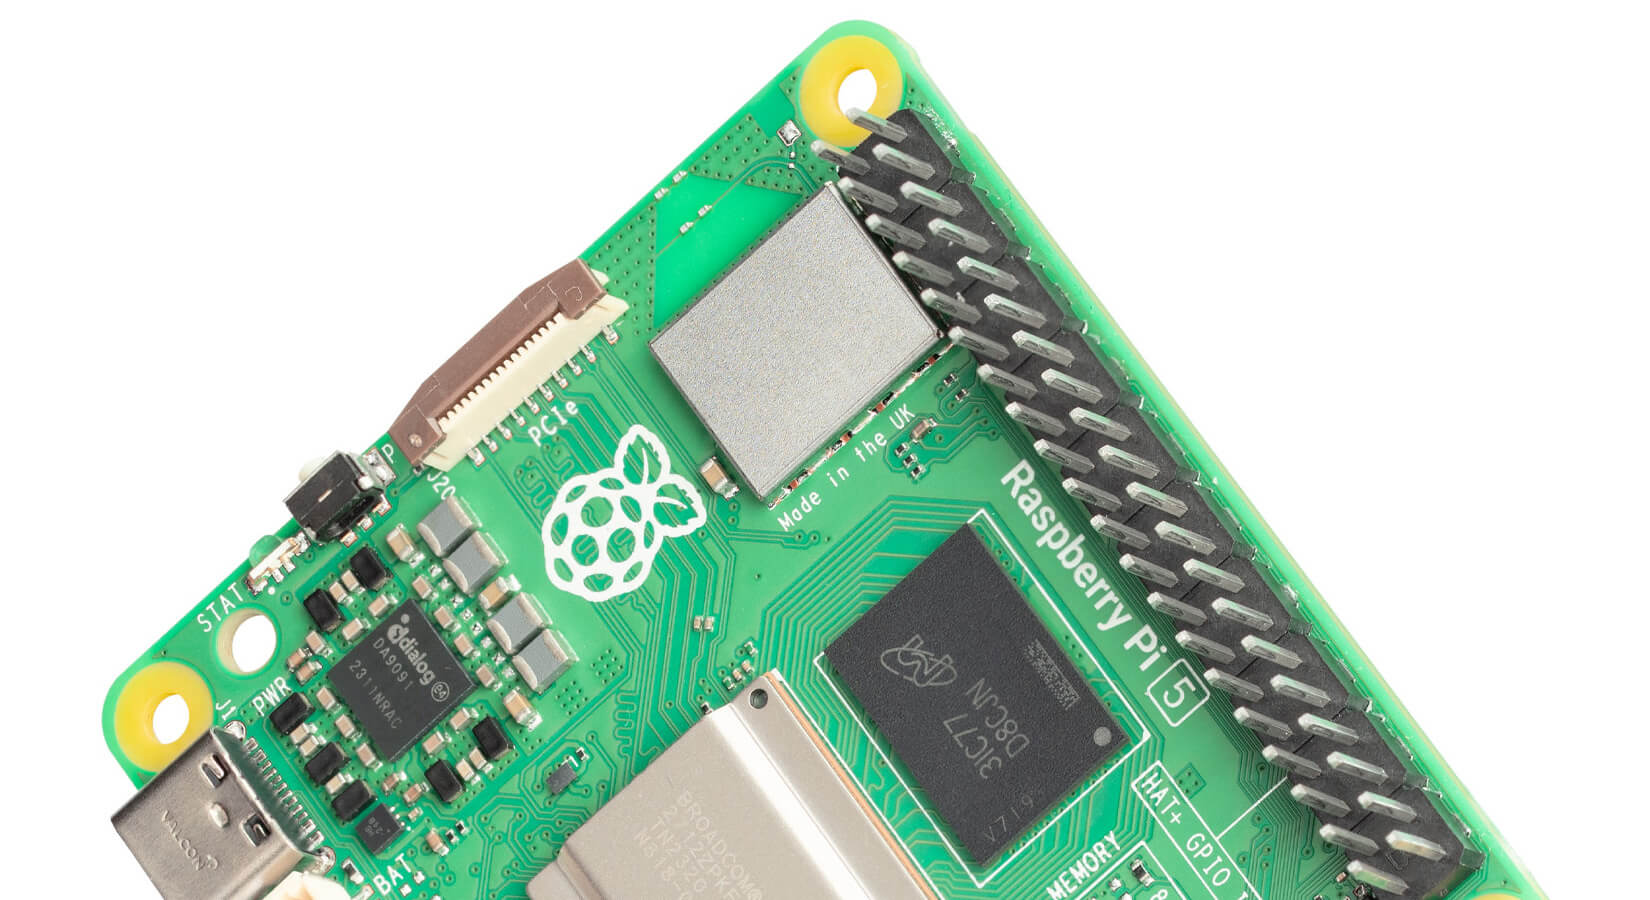 Raspberry Pi 5 Review: A New Standard for Makers (Updated)